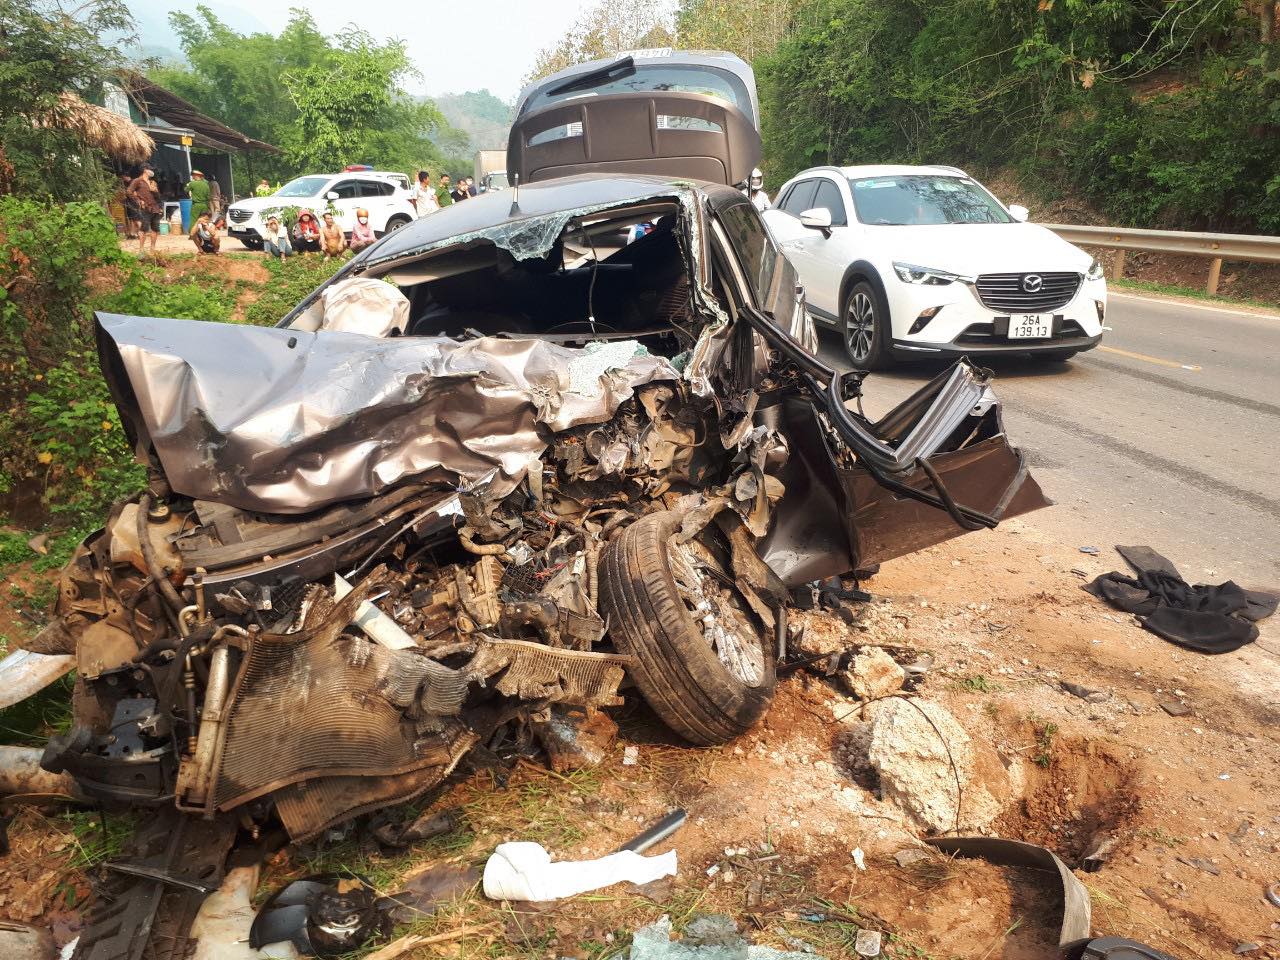 Car crushed its head after colliding with a truck, 1 dead, 2 injured - 1